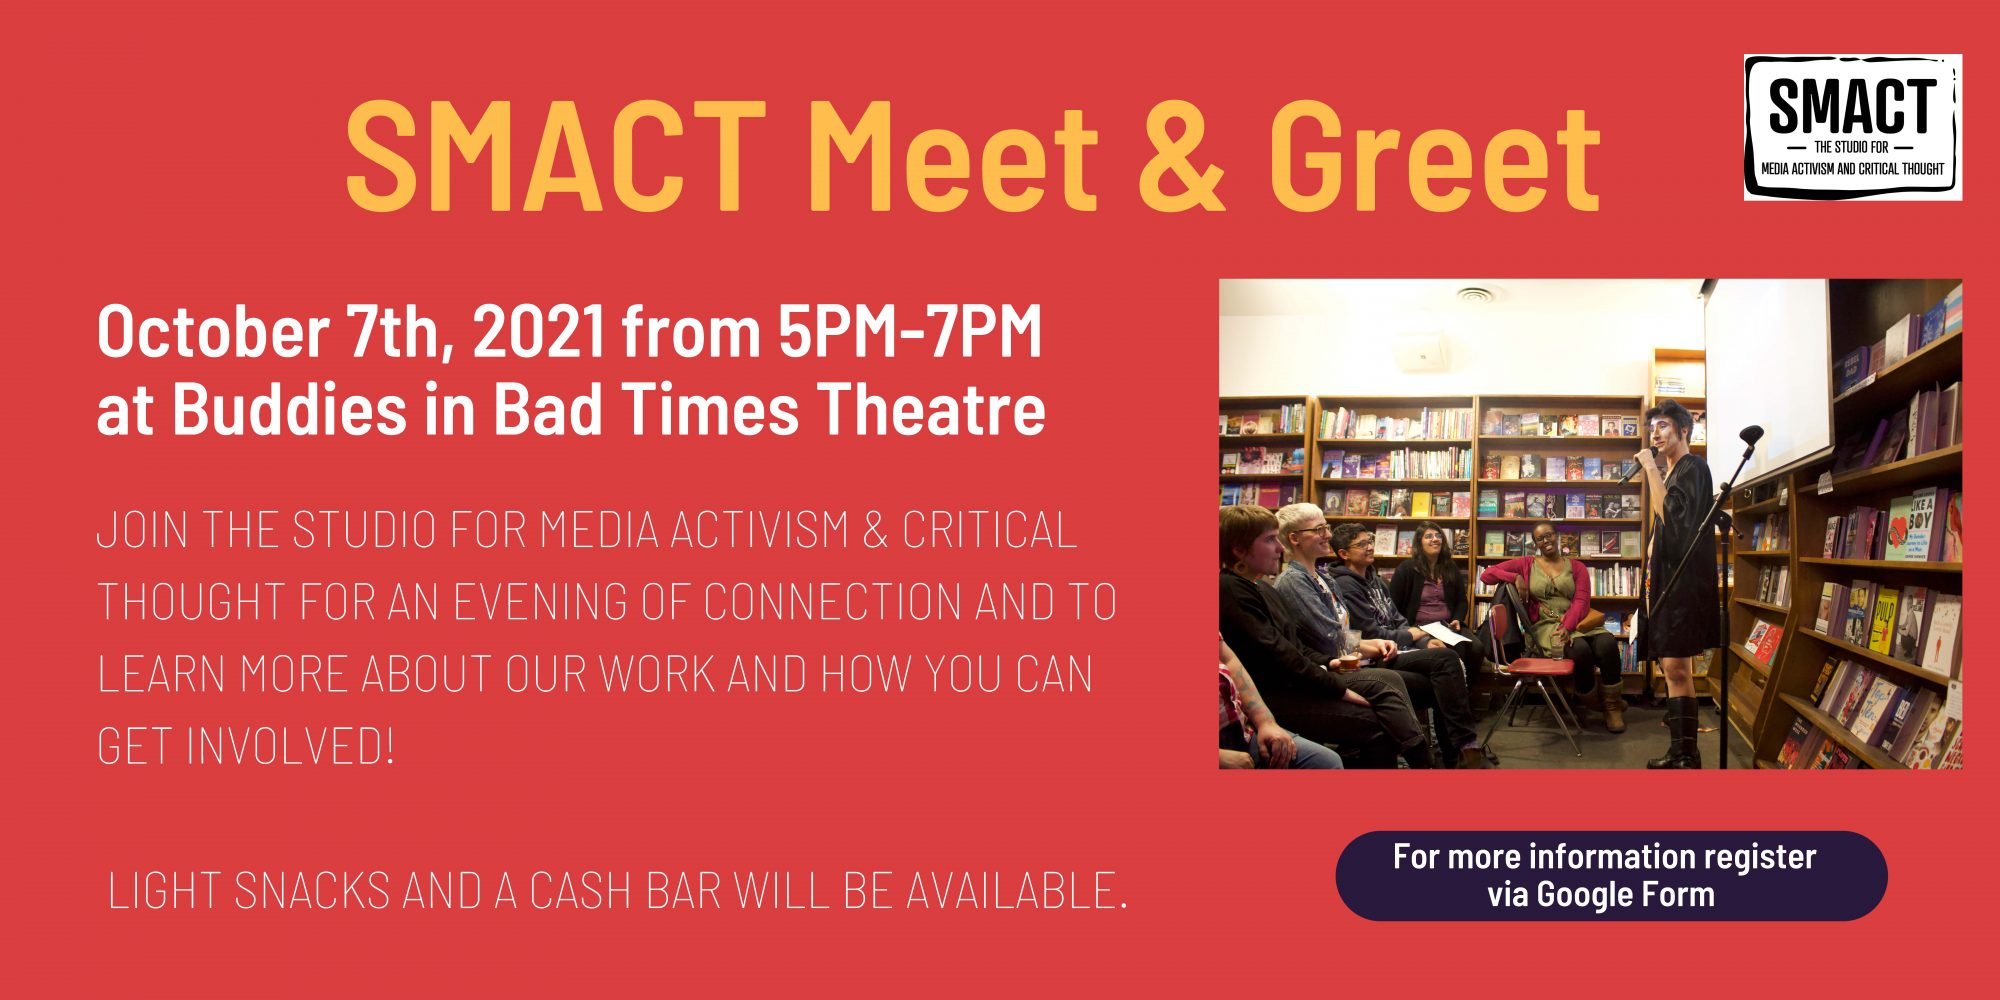 SMACT Meet & Greet banner - Oct 7, 5-7pm Buddies in Bad Time Theatre